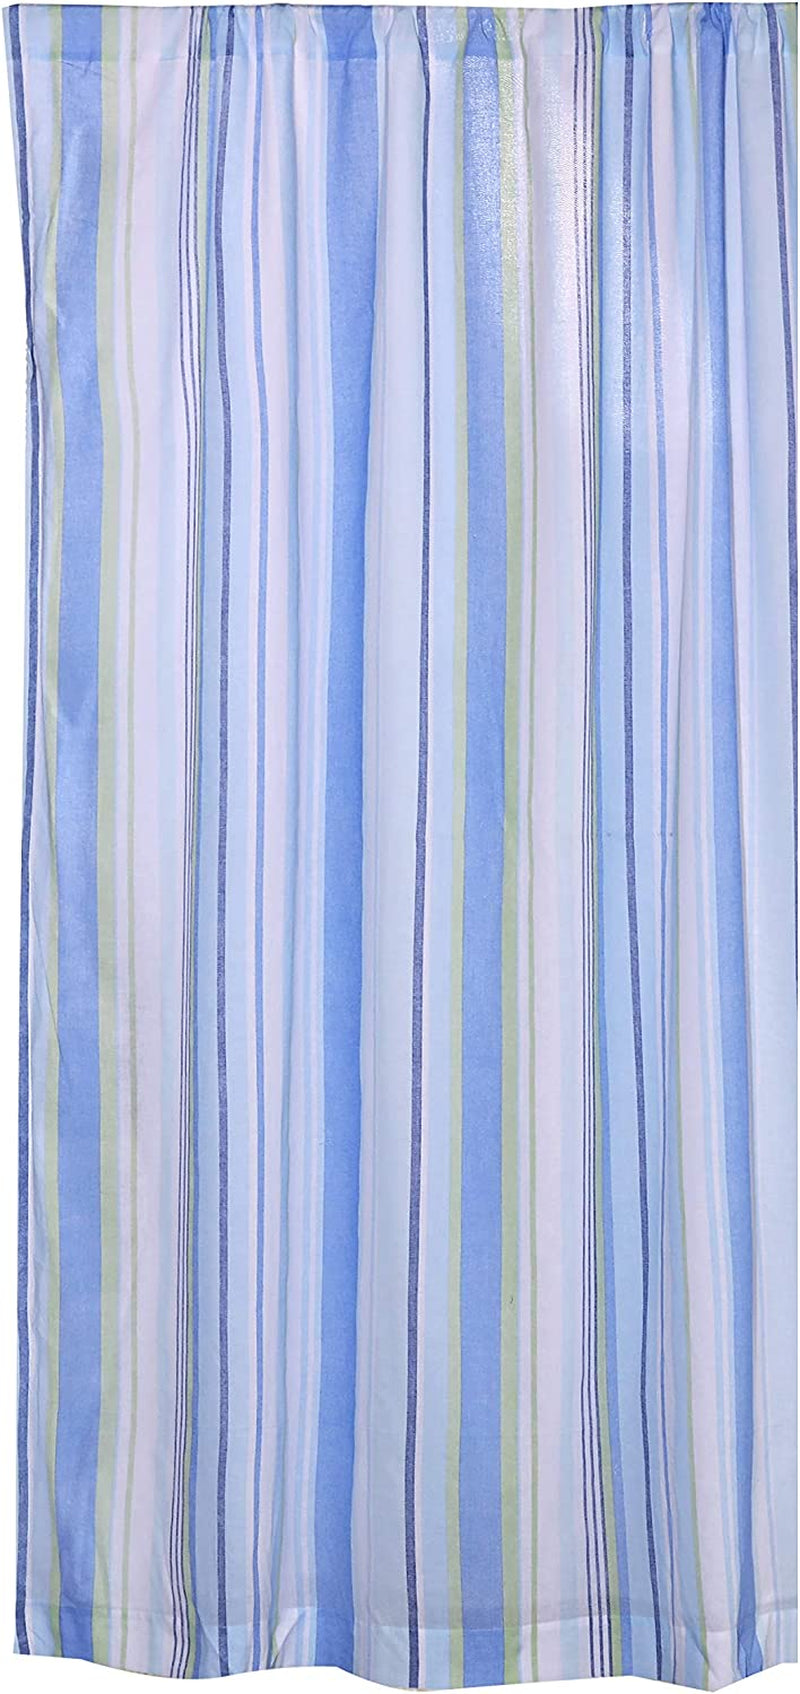 Levtex Home - Catalina - Drape Panel/Curtain (55X84In.) Set of 2 with Rod Pocket - Striped Coastal Pattern in Blues and Greens - White, Green, Blues - Cotton Fabric Home & Garden > Decor > Window Treatments > Curtains & Drapes Levtex Home Drape Panel 55x84  